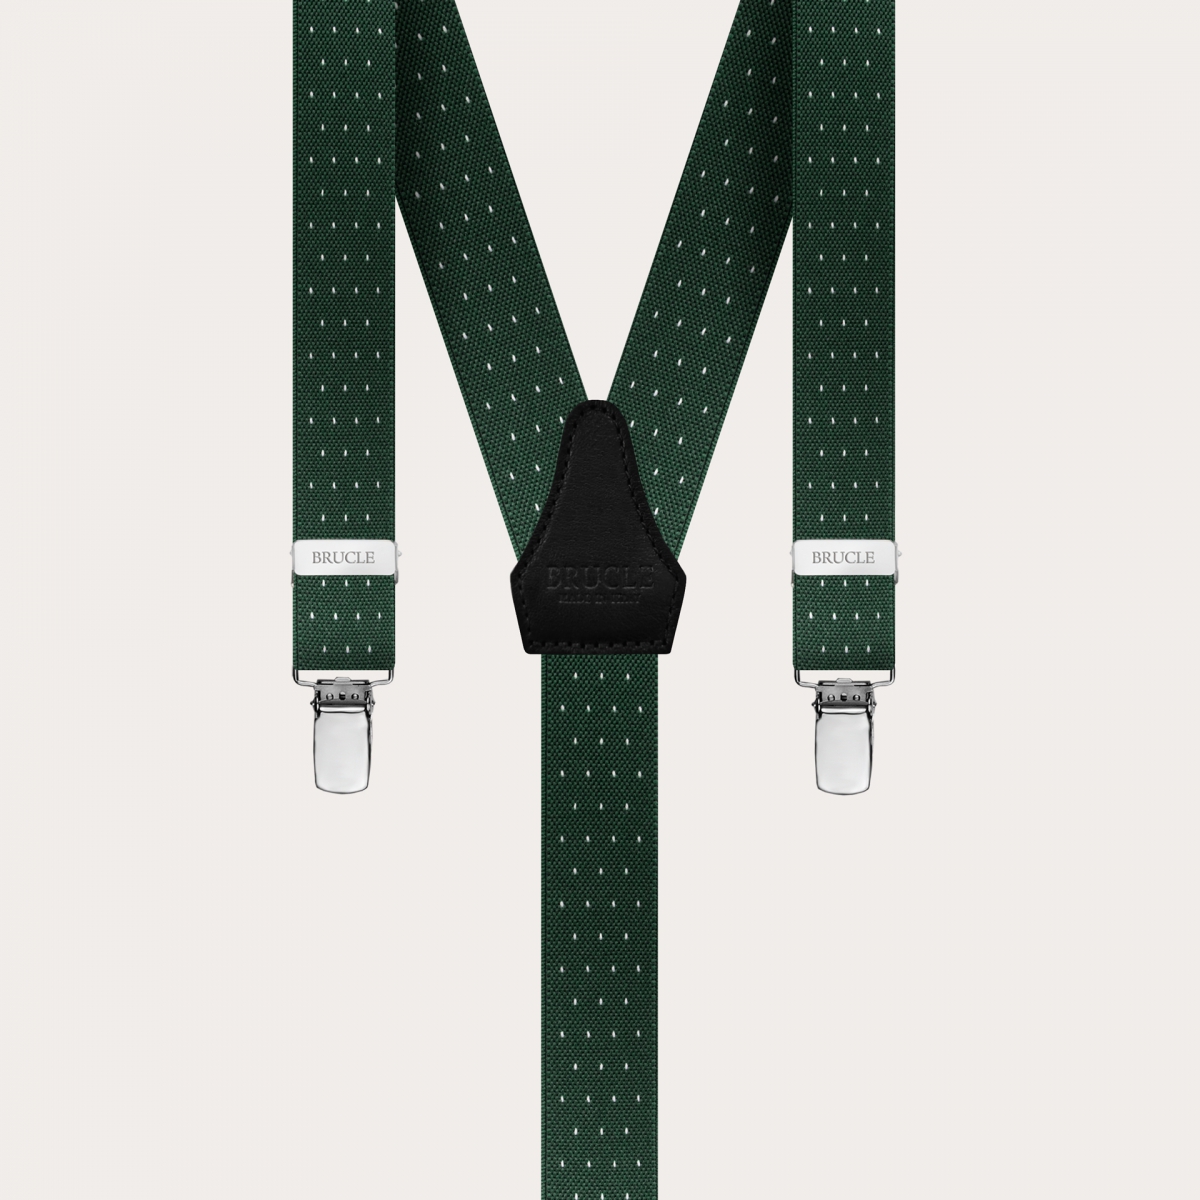 BRUCLE Refined nickel free narrow suspenders with dotted pattern, green